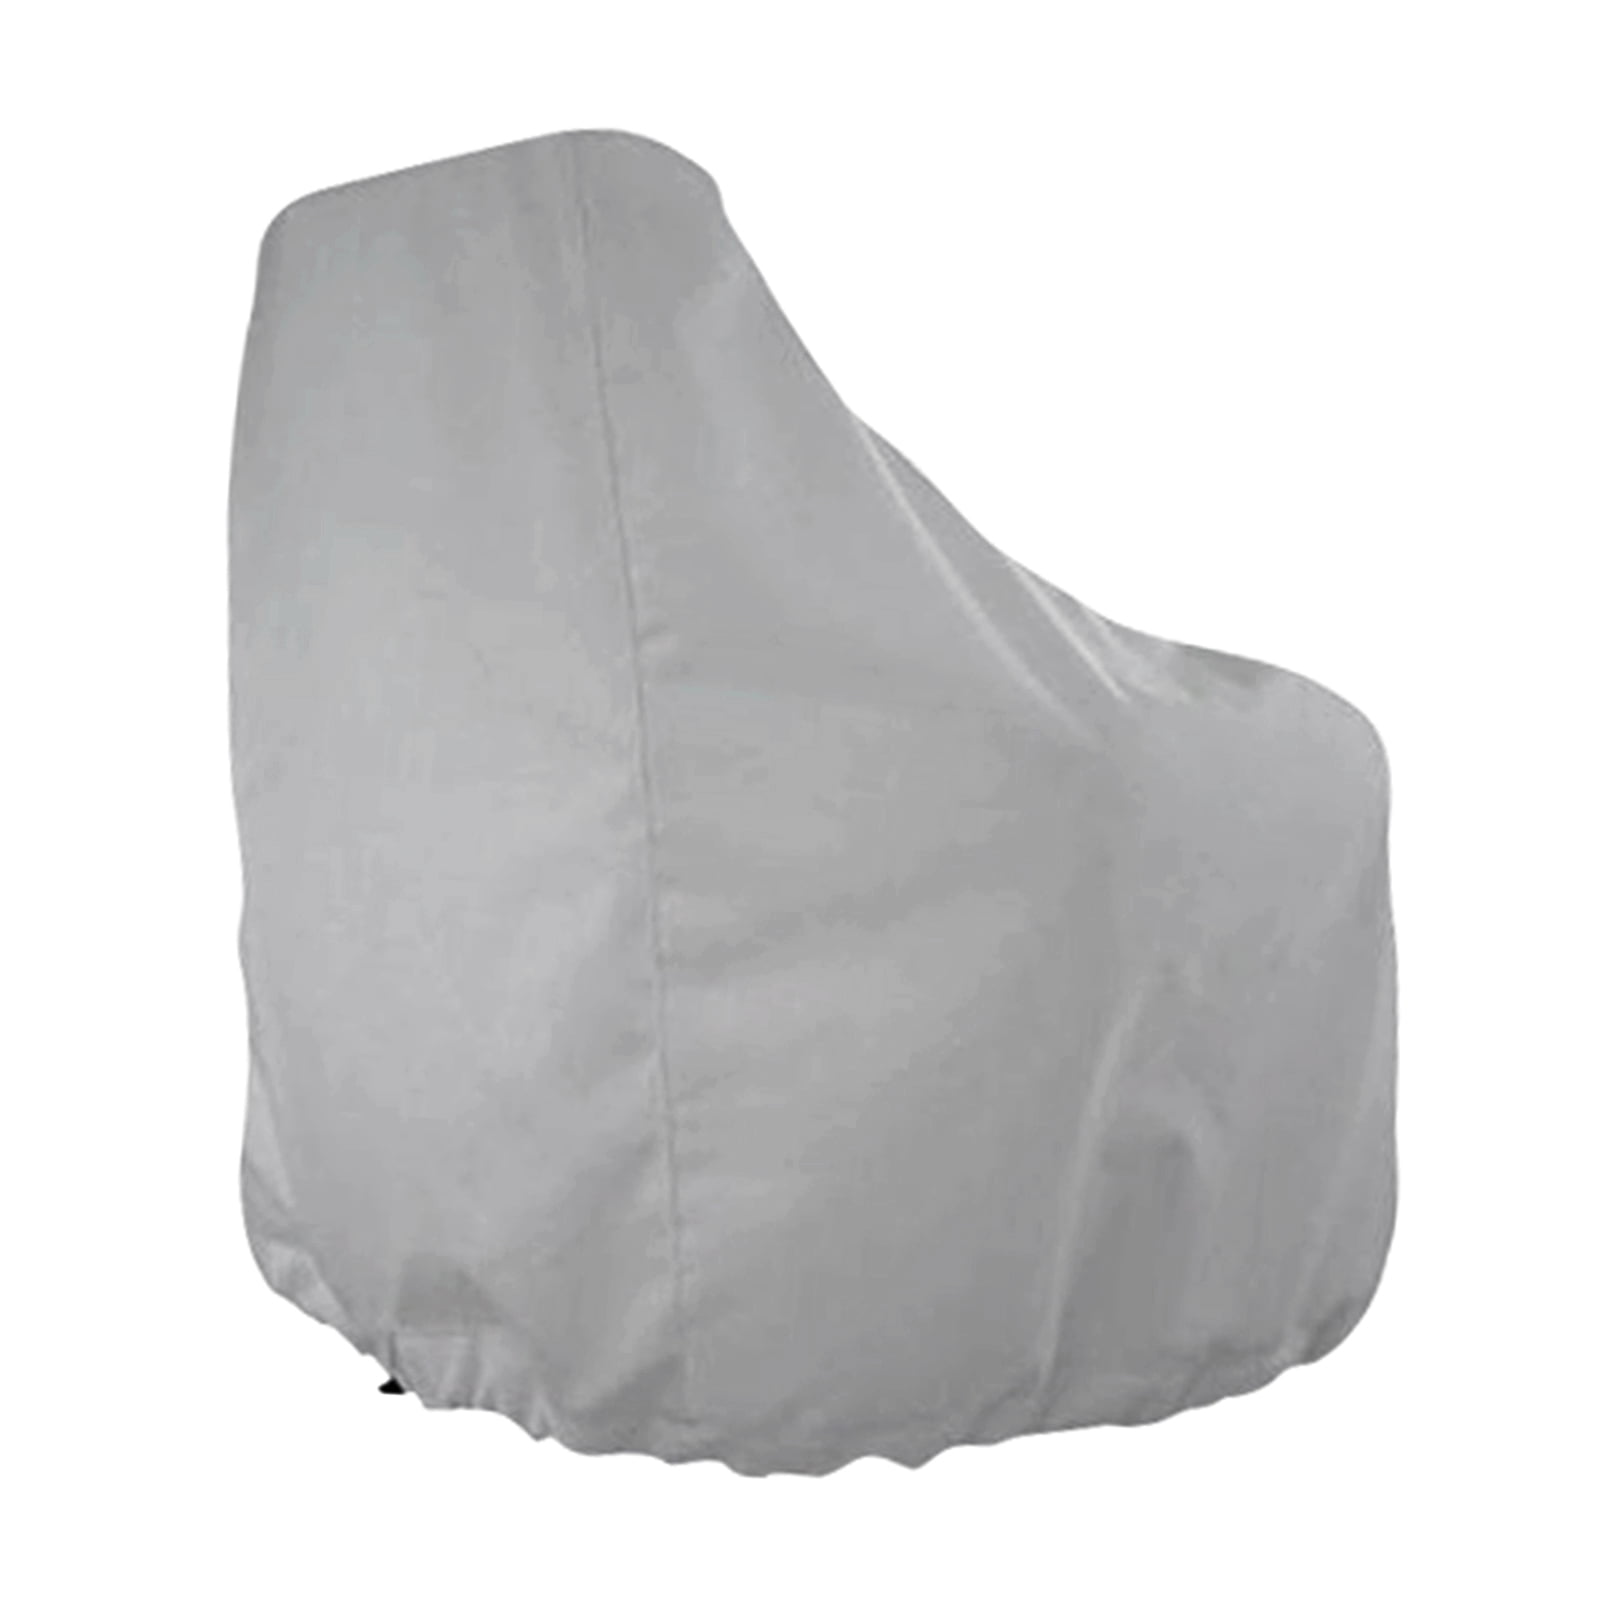 Boat Seat Cover,Outdoor Yacht Boat Seat Cover Water,Weather